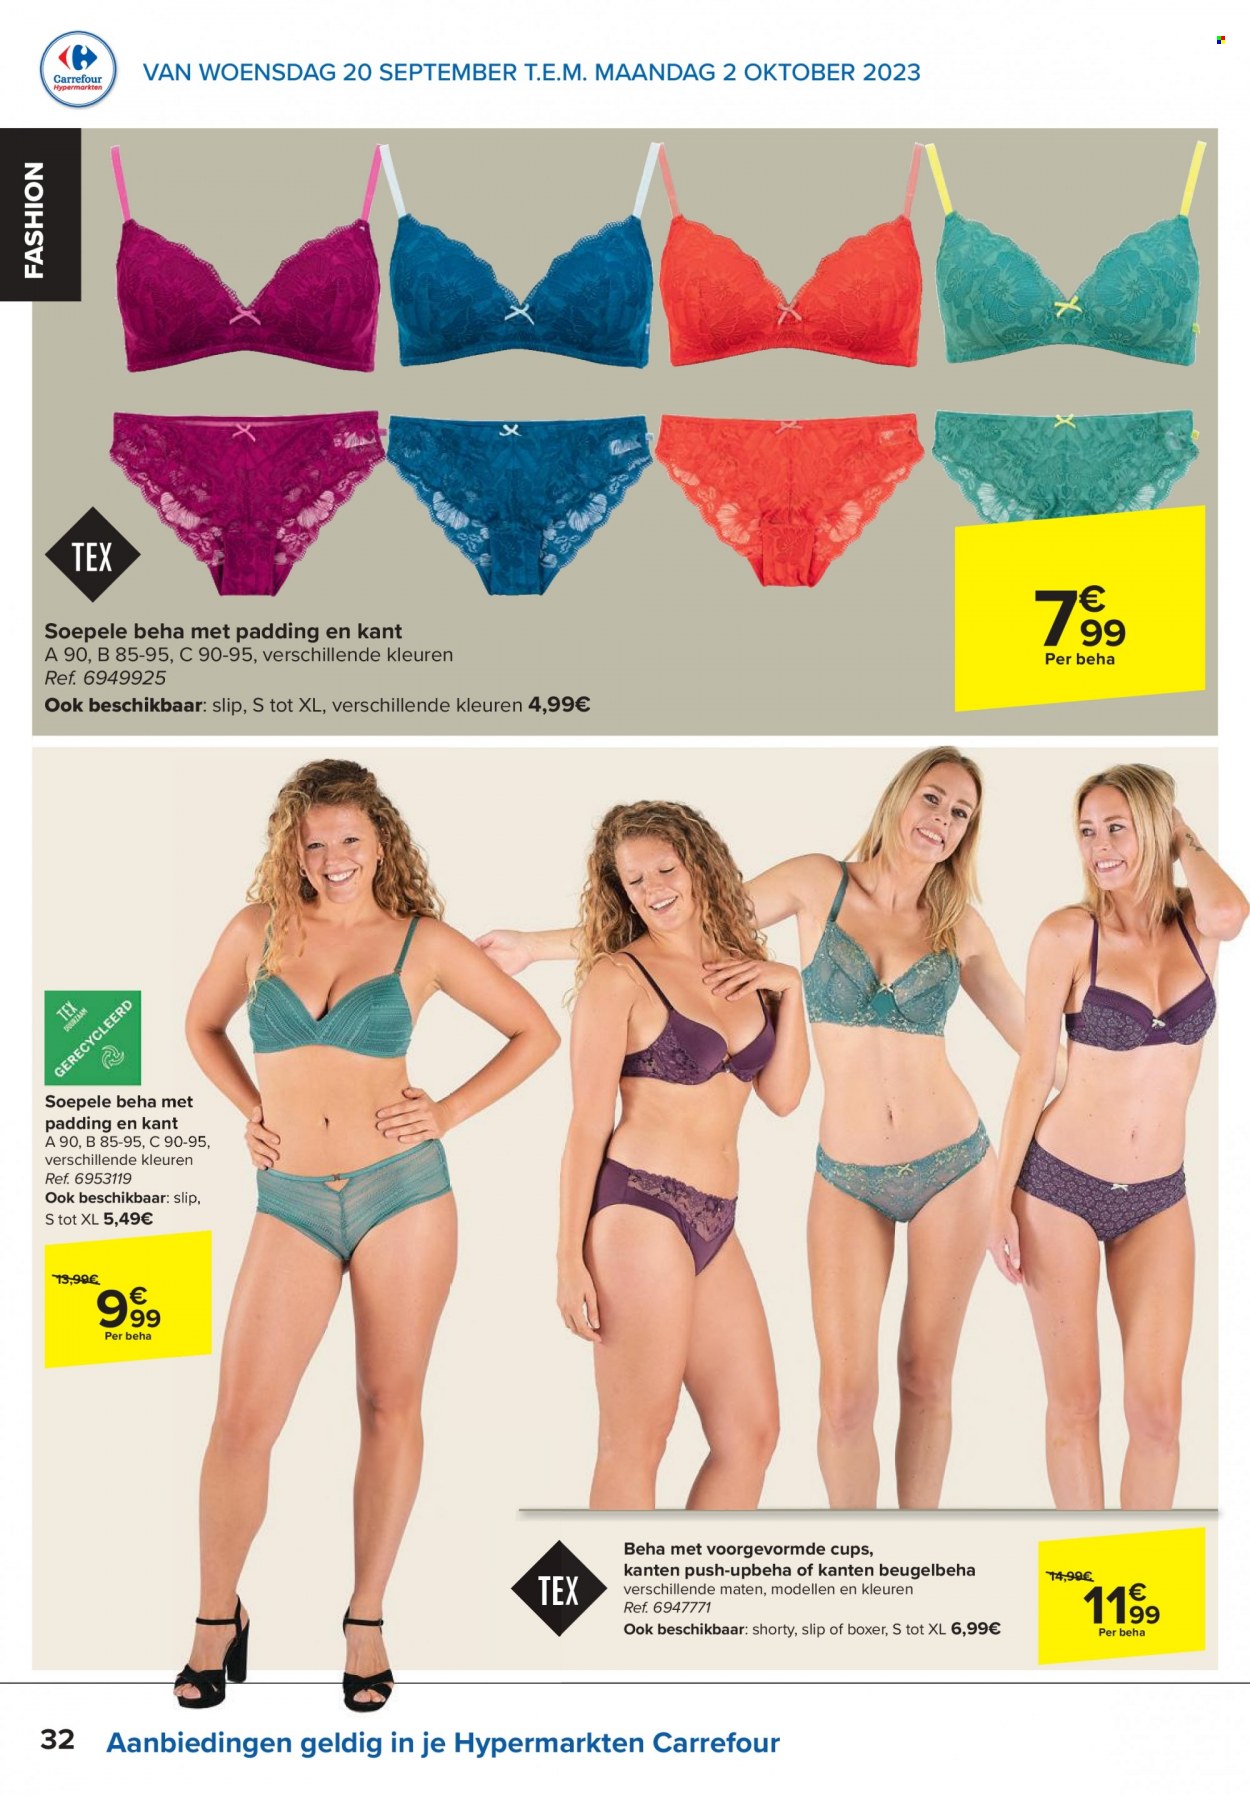 Catalogue Carrefour hypermarkt - 20.9.2023 - 2.10.2023. Page 32.